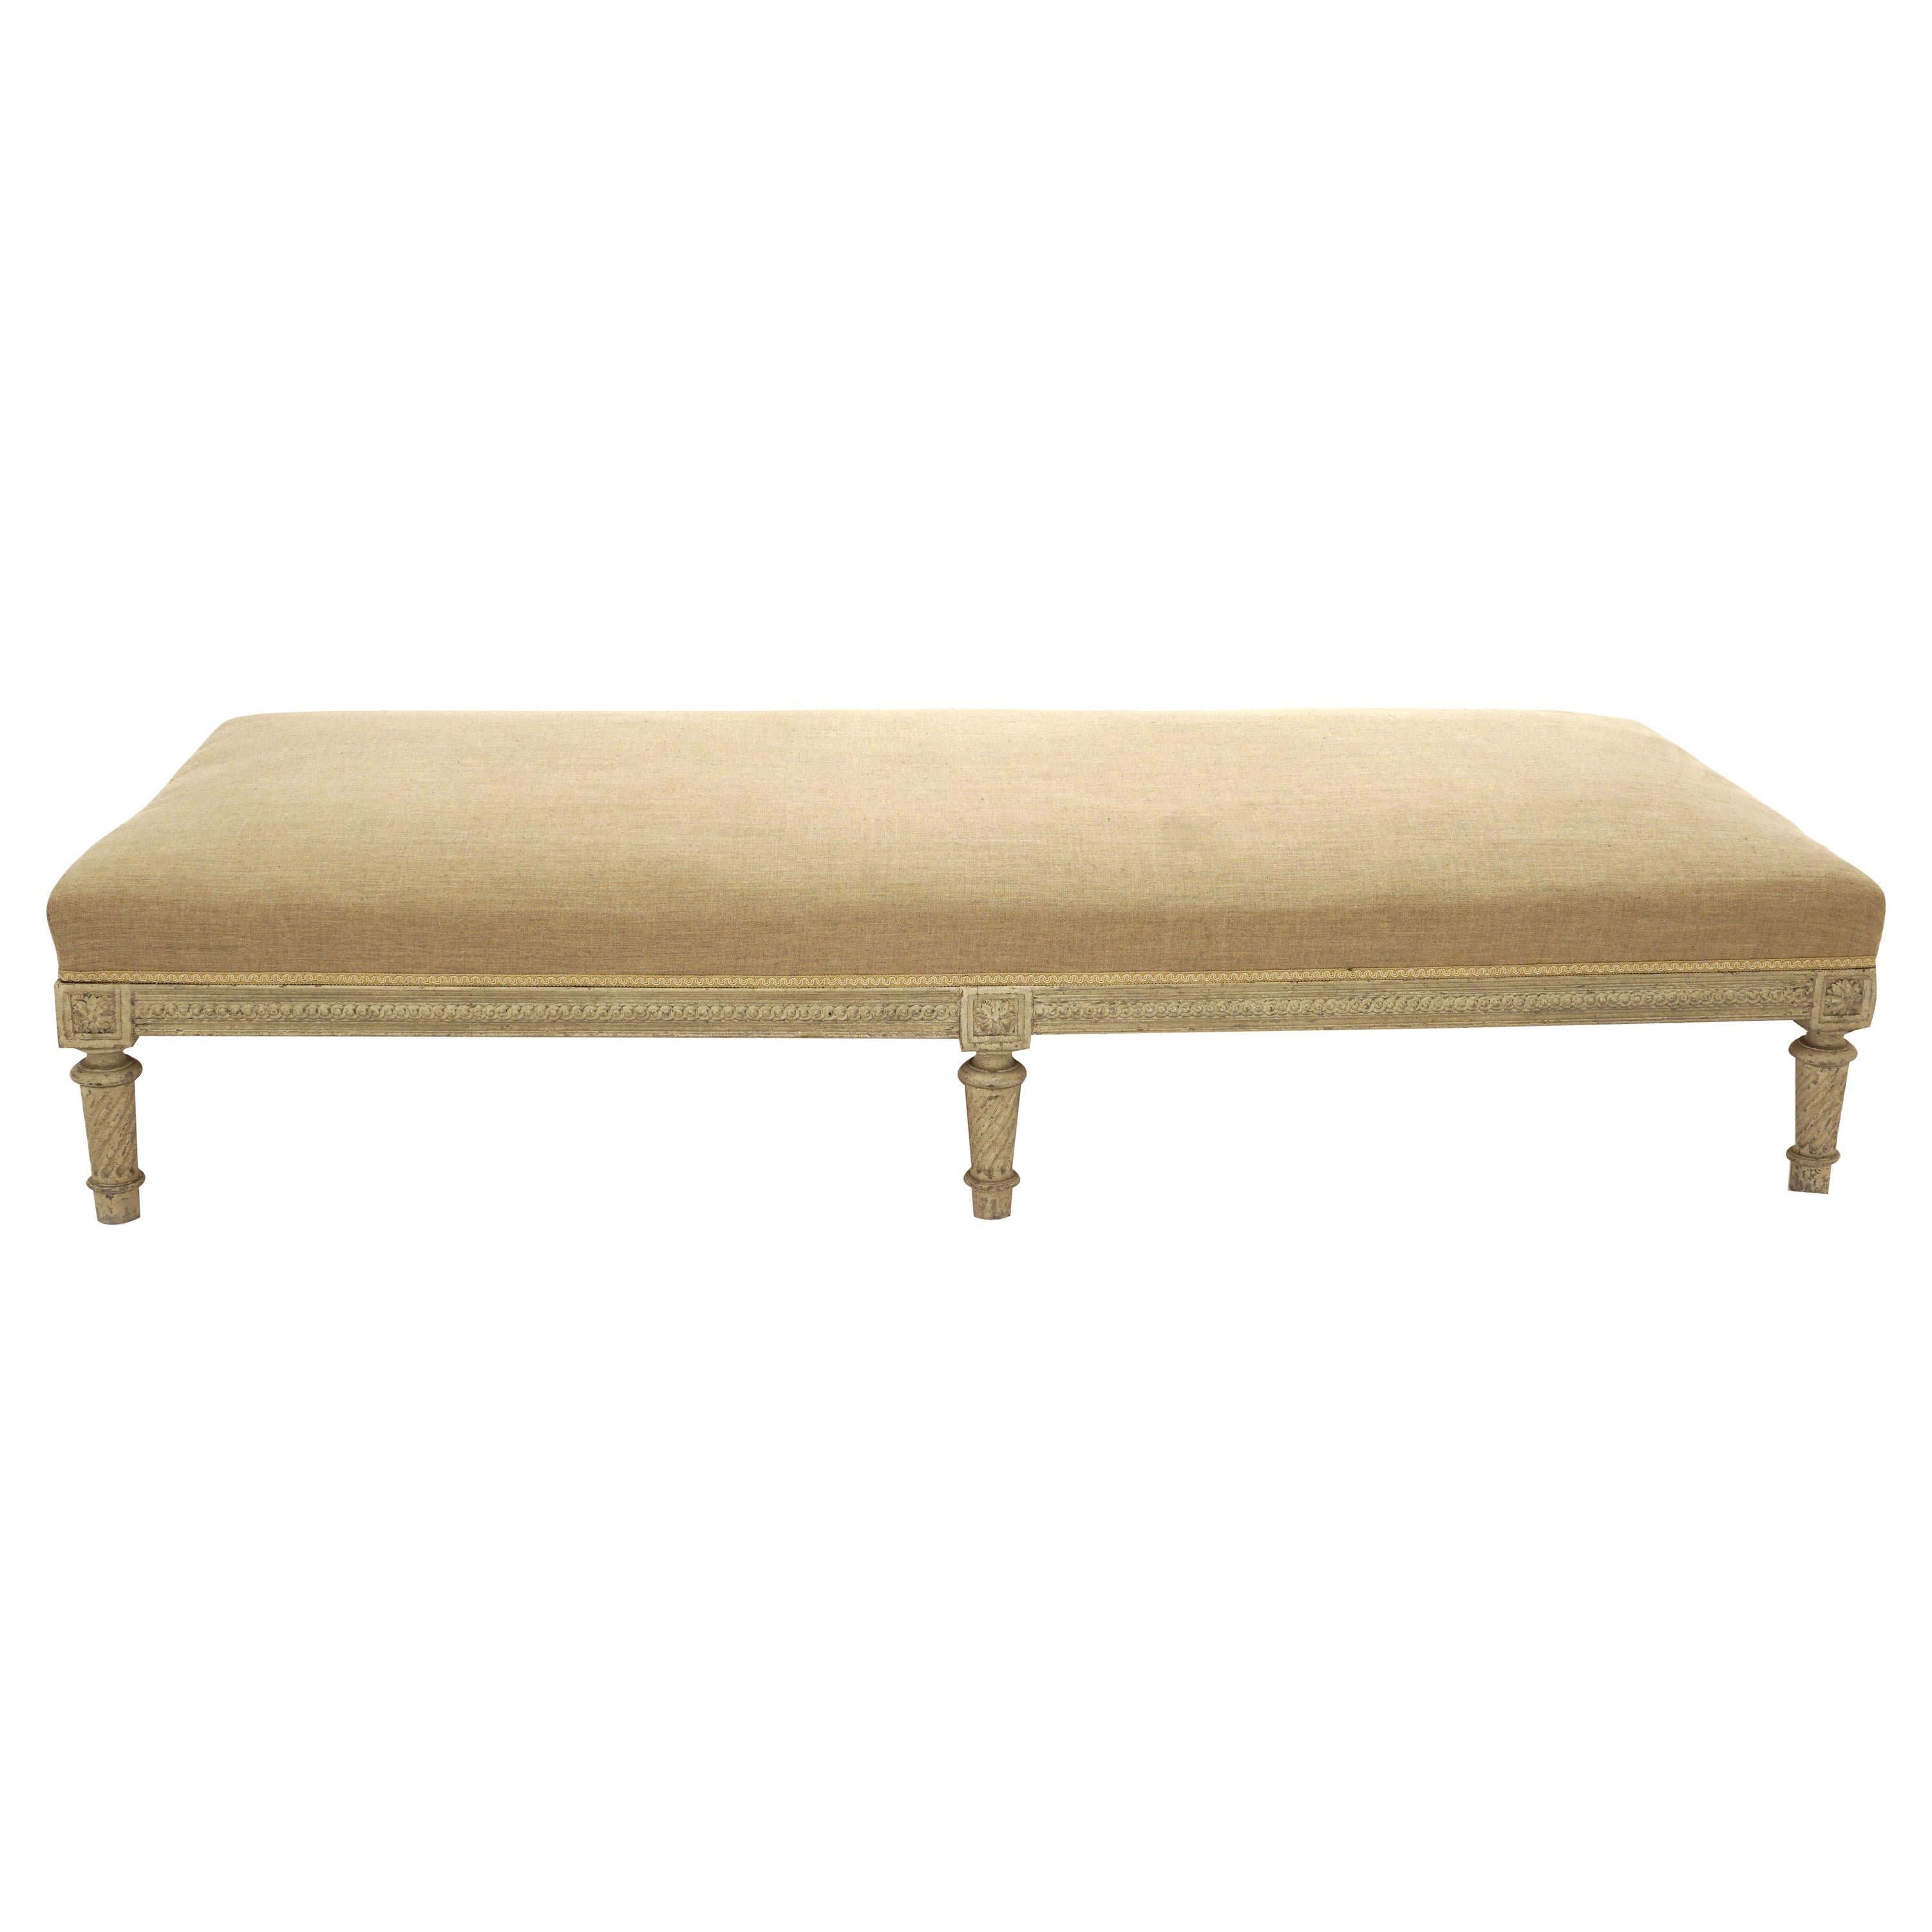 Gustavian Style Daybed in Grey/White Colors, Sweden, circa 1860-80 For Sale